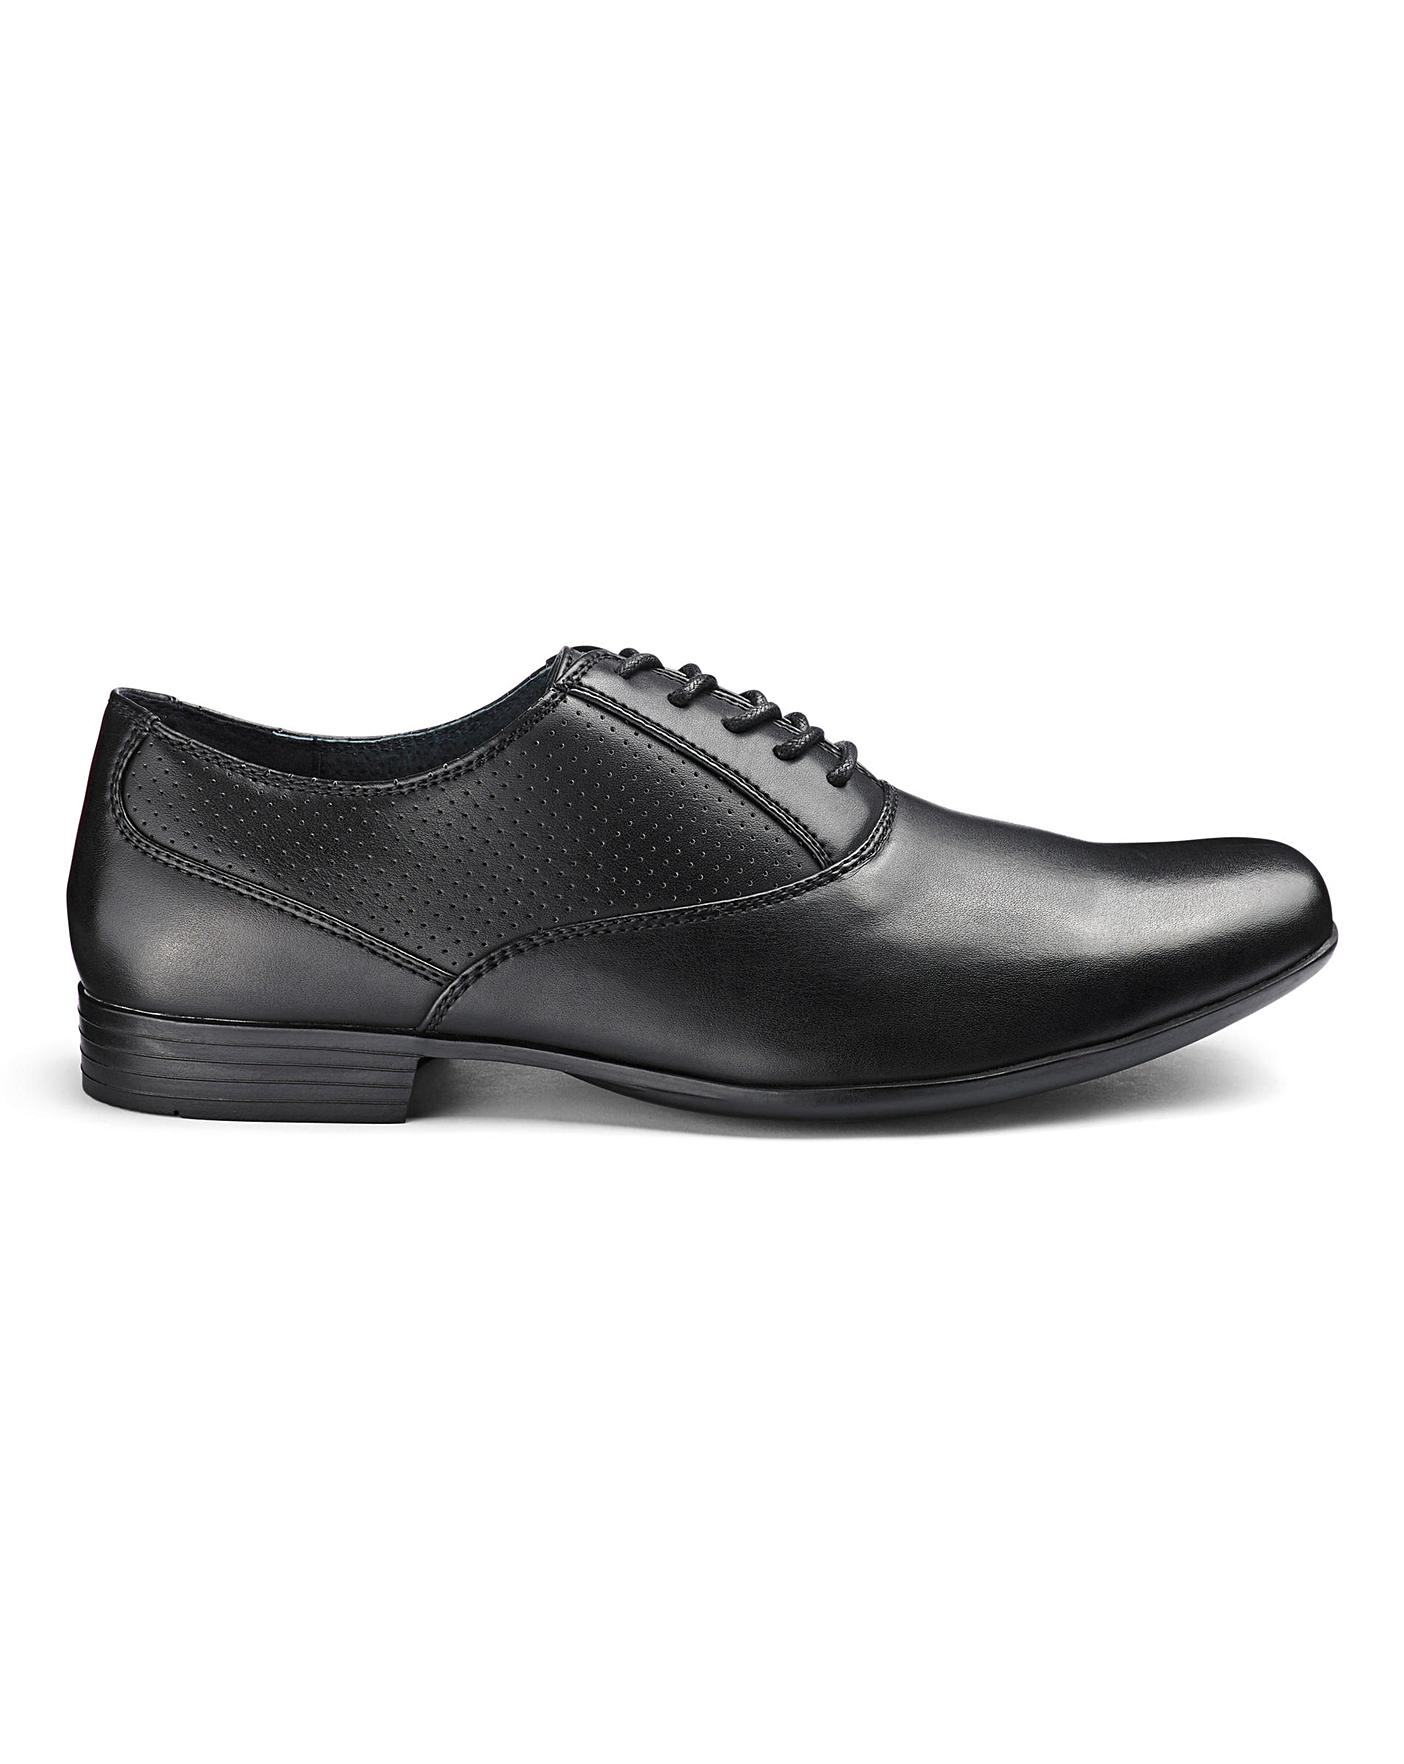 Trustyle Derby Shoes Standard Fit